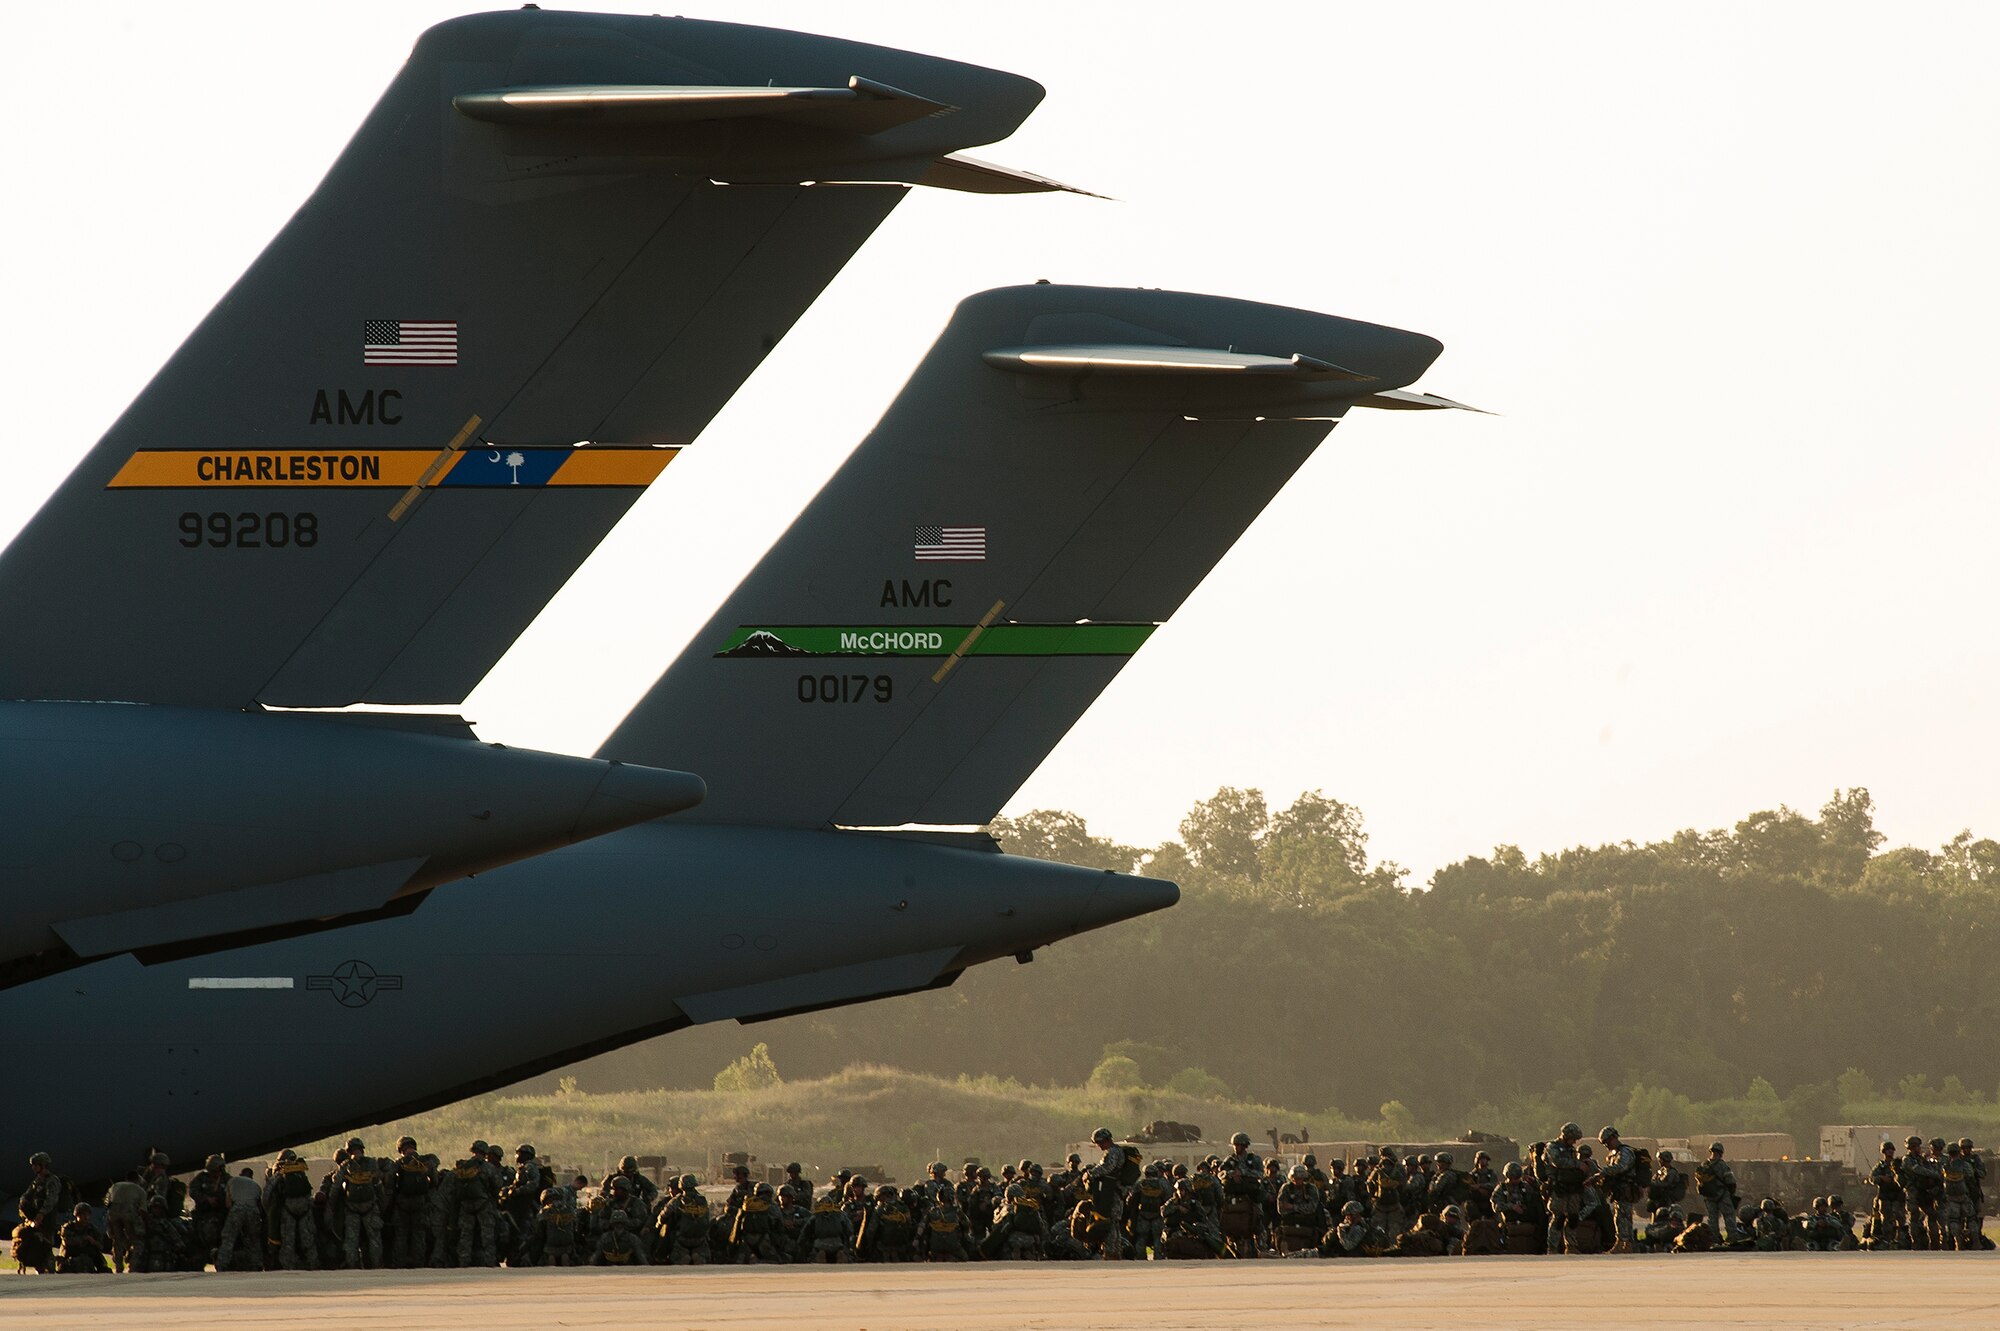 U.S. Army paratroopers from the 82nd Airborne Division wait to board C-17 Globemasters Aug. 18, 2013, at Alexandria International Airport, La. The paratroopers were conducting static line jumps as part of Joint Operational Access Exercise 13-0X. (U.S. Air Force photo by Staff Sgt. Russ Scalf)